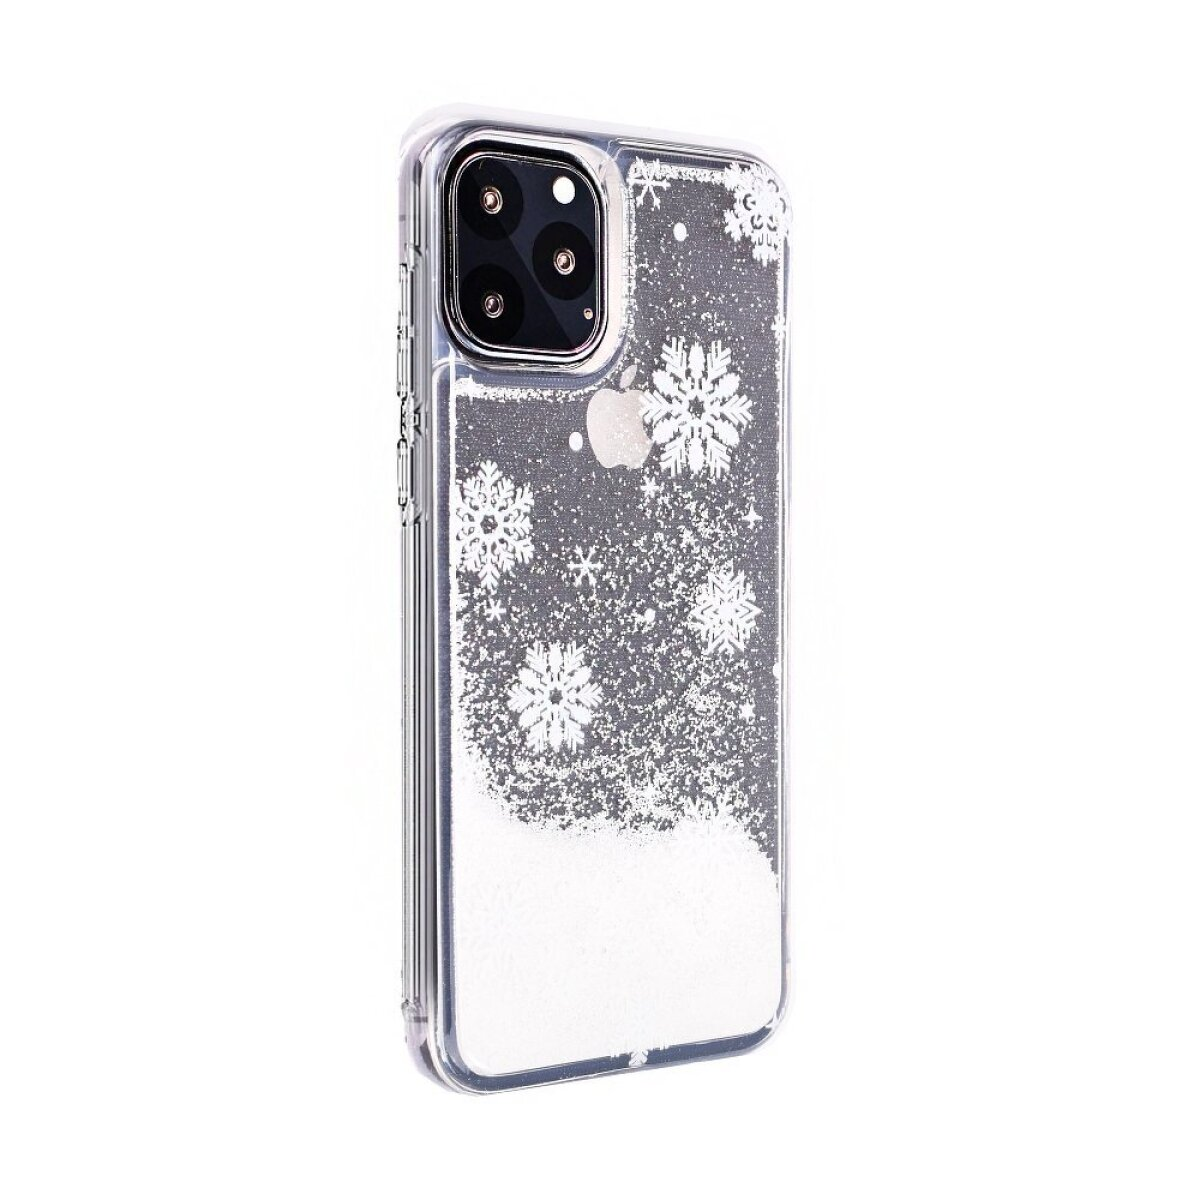 FORCELL Winter iPhone 11 Pro Cover, 11 Max, Max snowflakes, Full Apple, Pro Not iPhone available